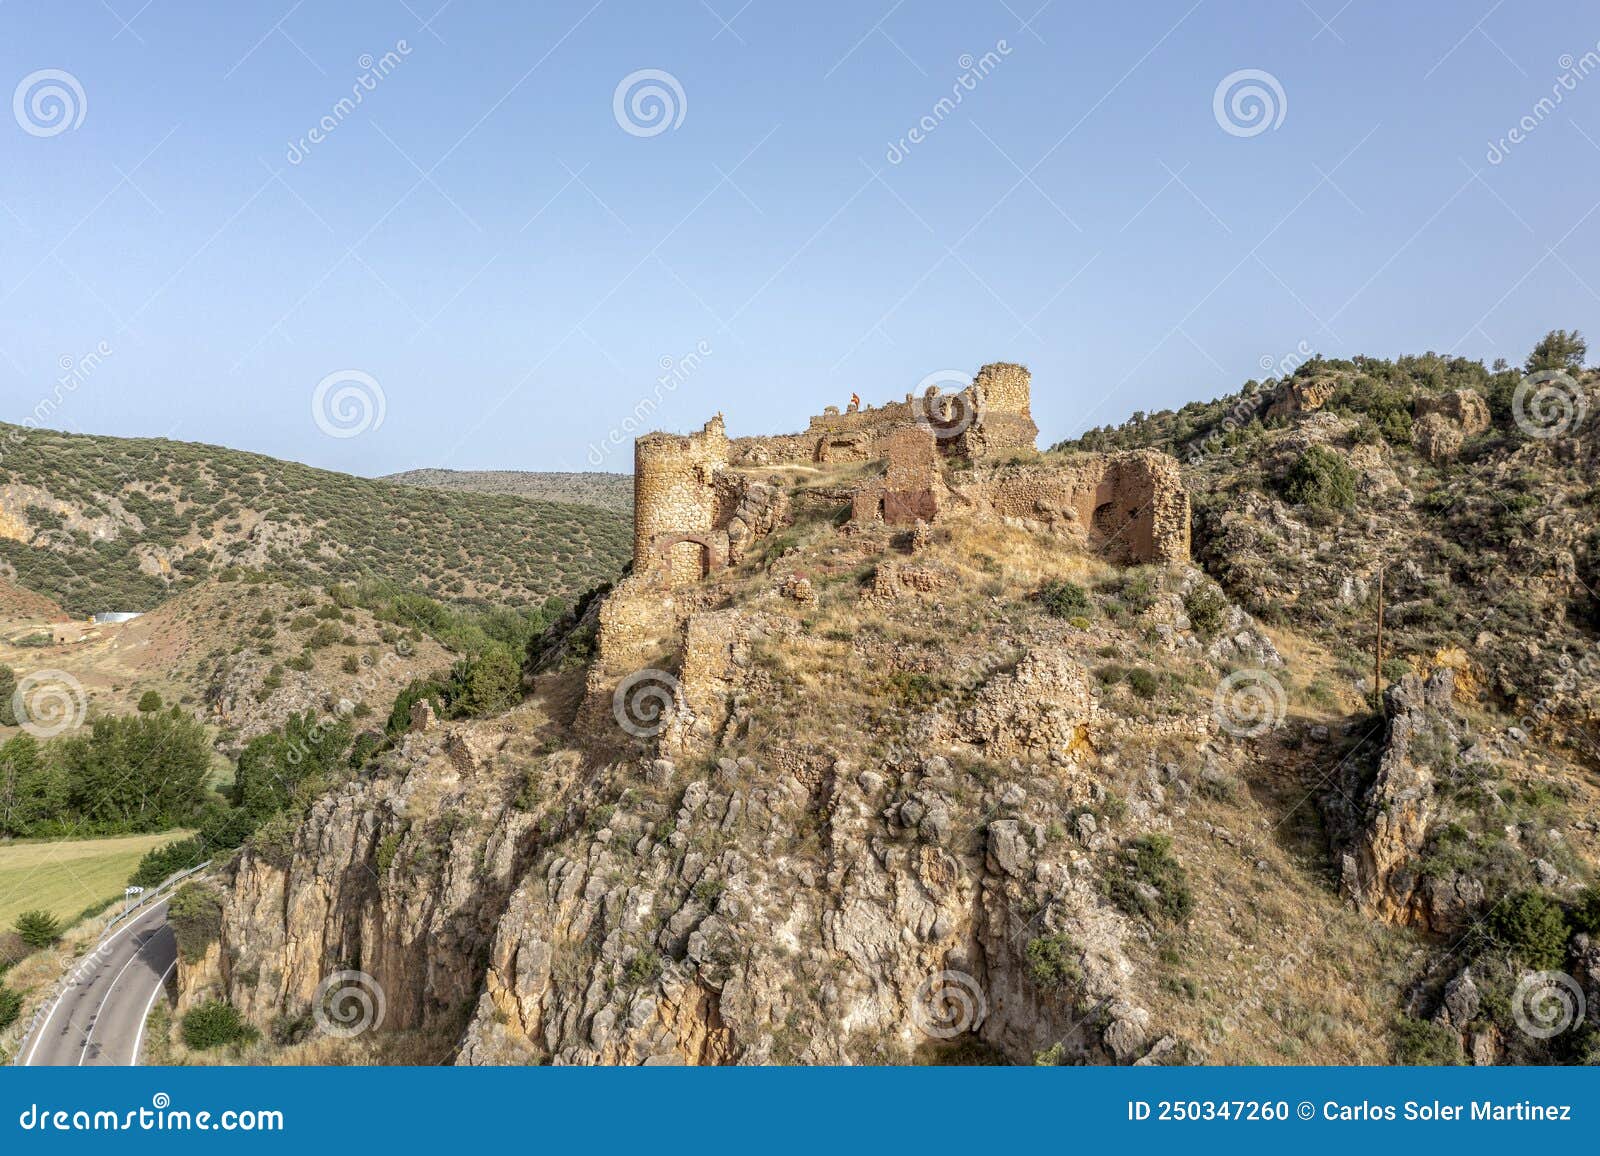 santa croche castle is a medieval castle built on the site of santa croche, on the outskirts of the town of albarracin, province